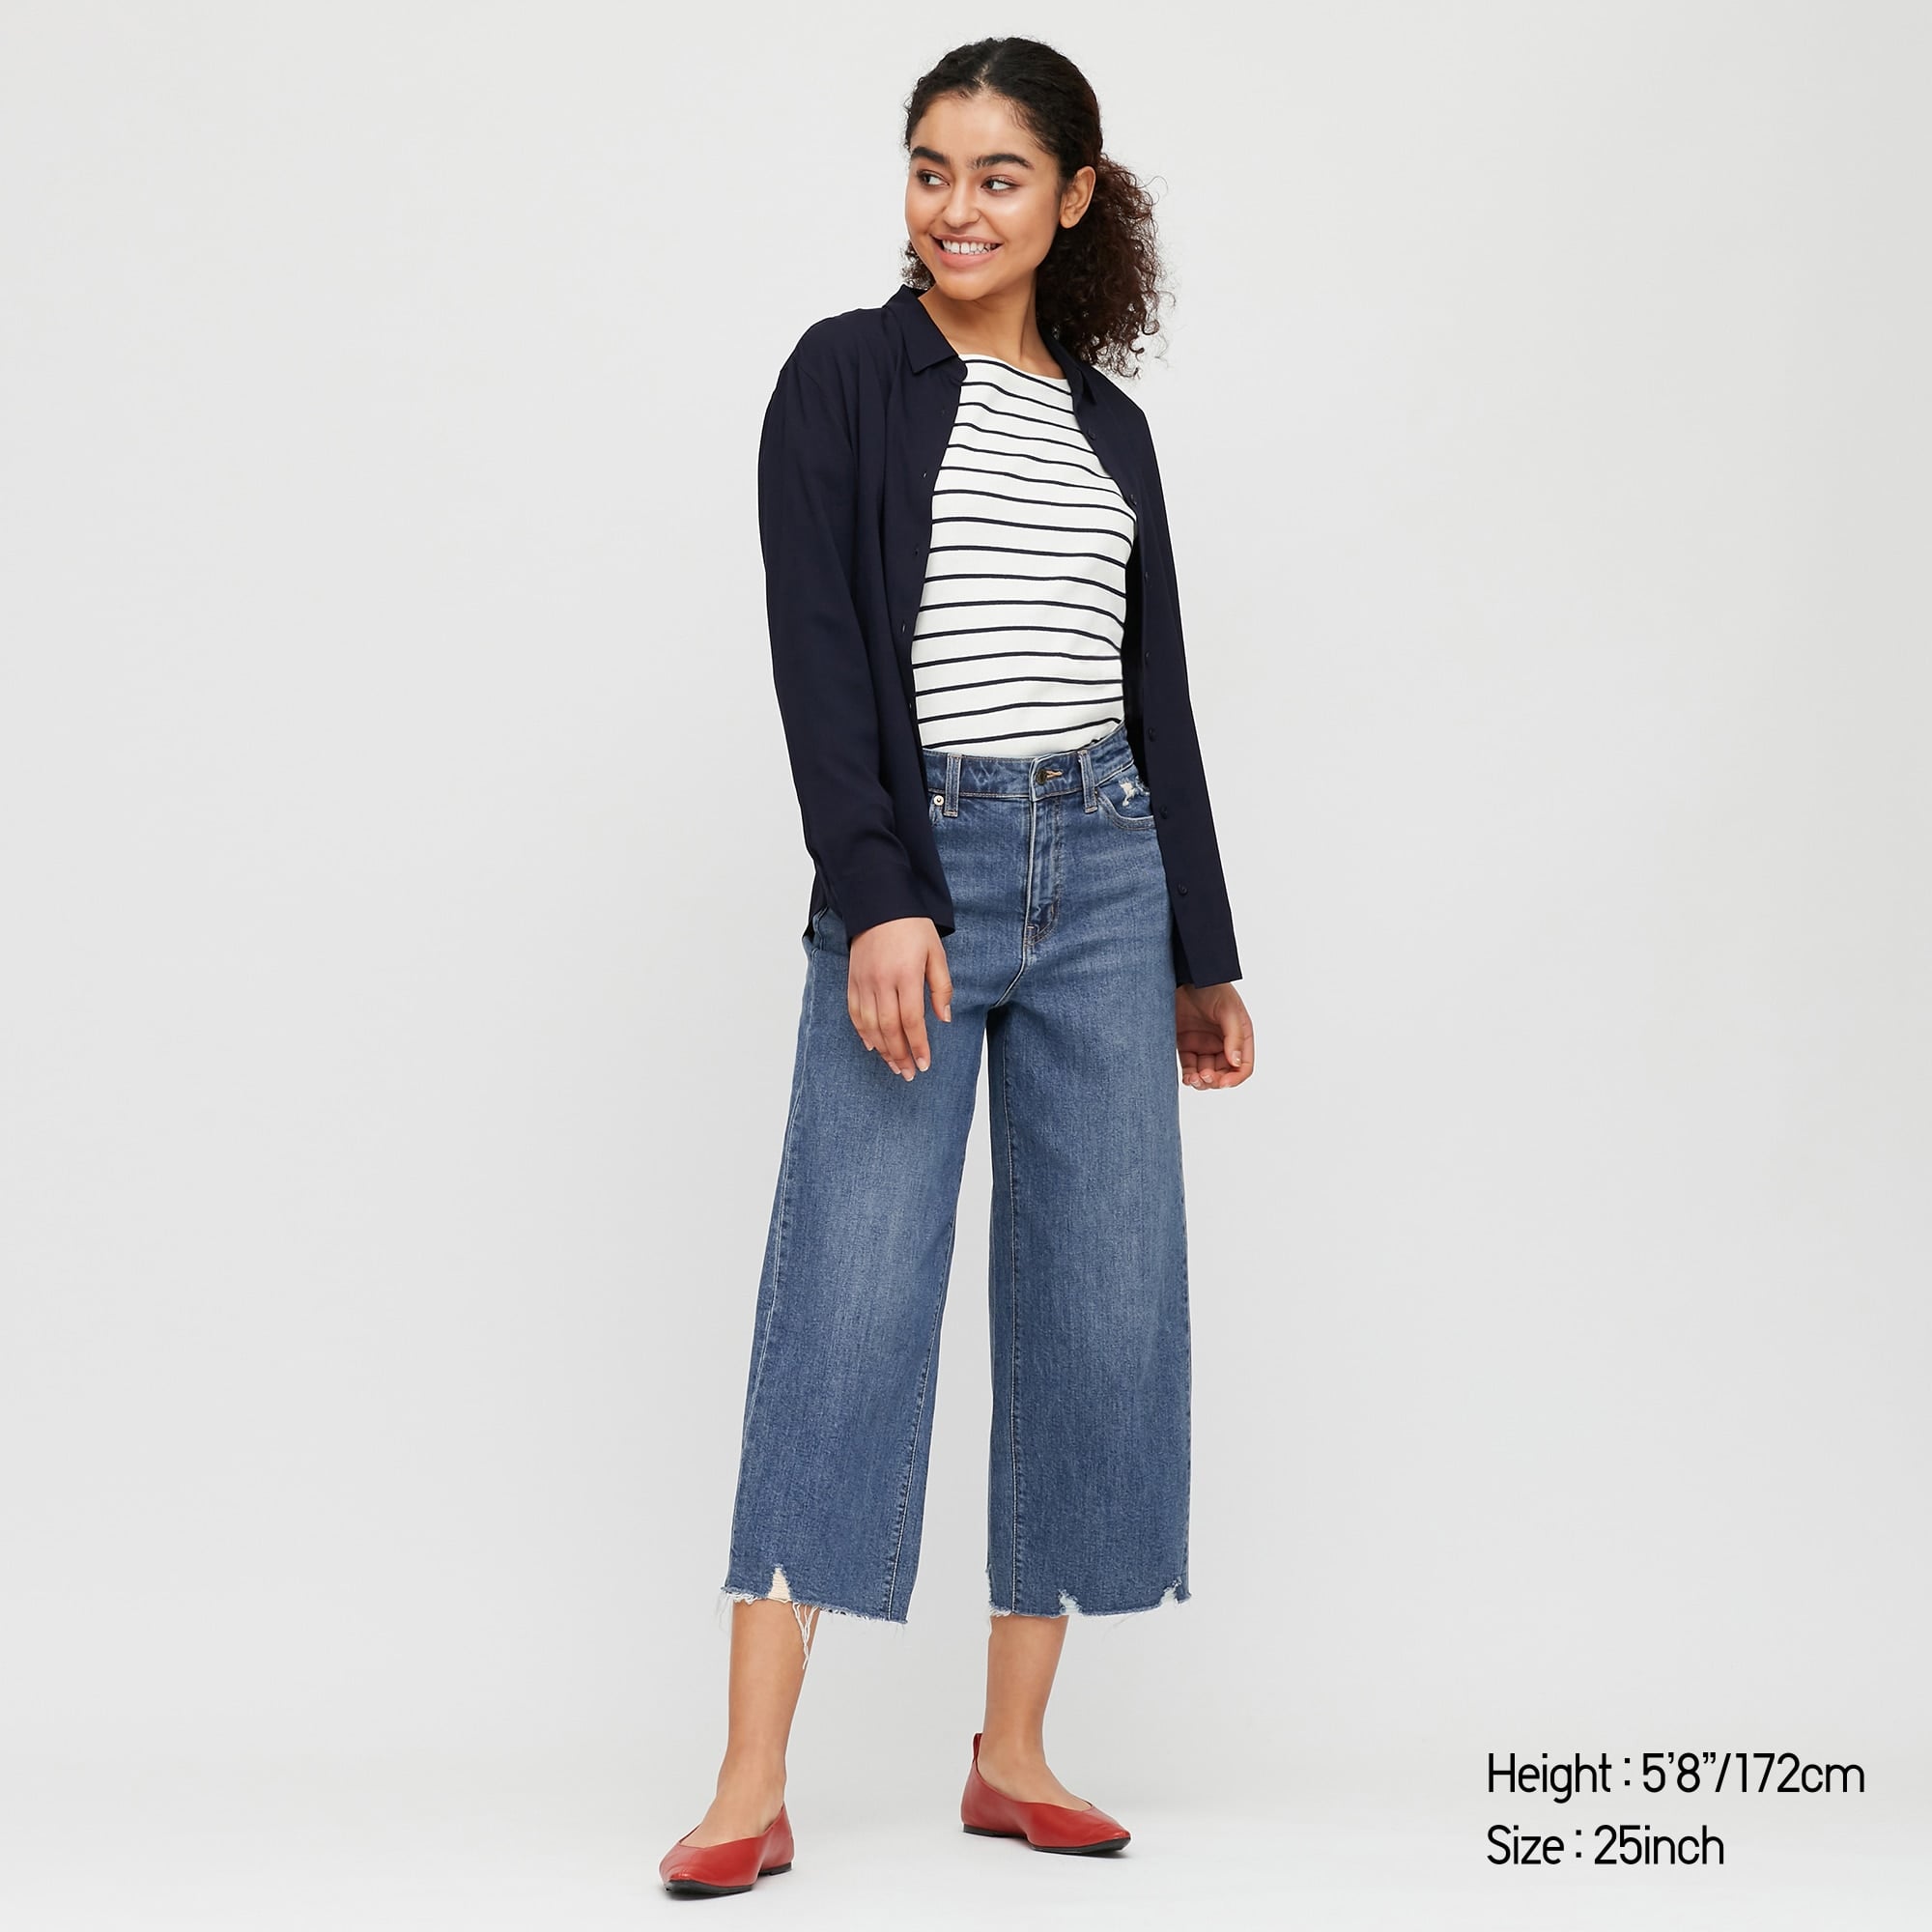 uniqlo high rise wide cropped jeans